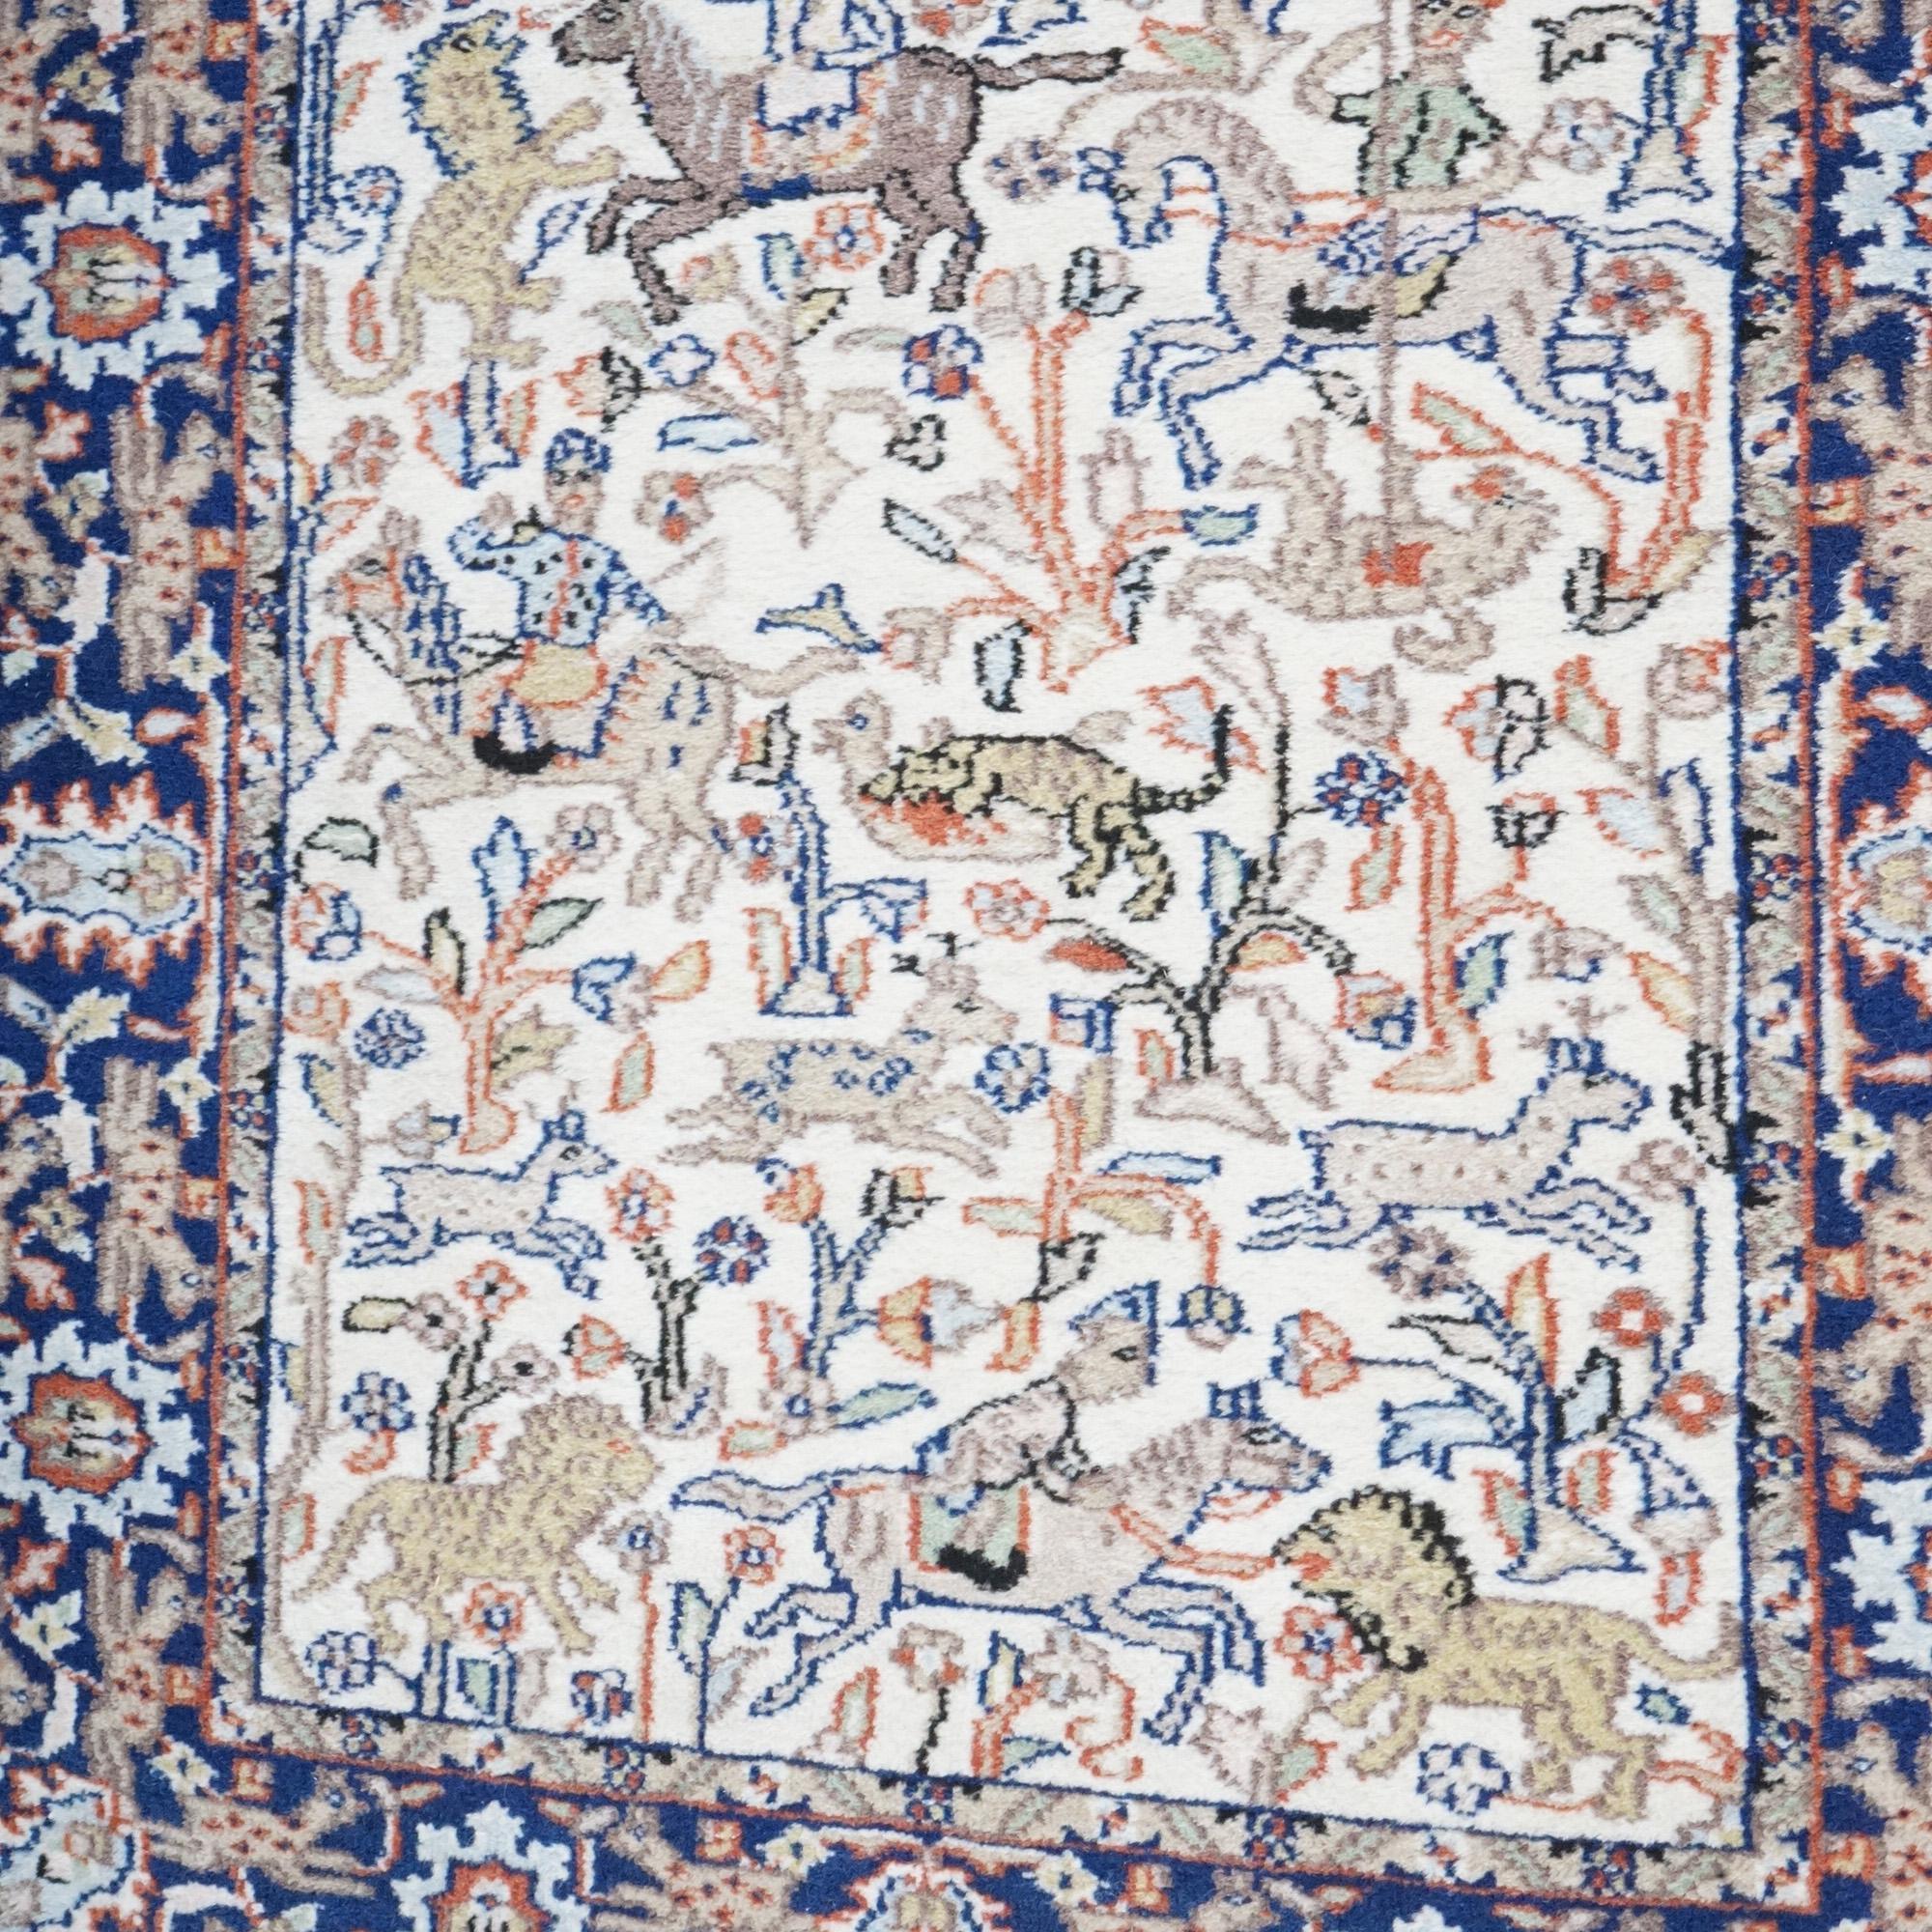 Tabriz Oriental Wool Hunt Rug with Figures & Animals, 20th Century For Sale 10